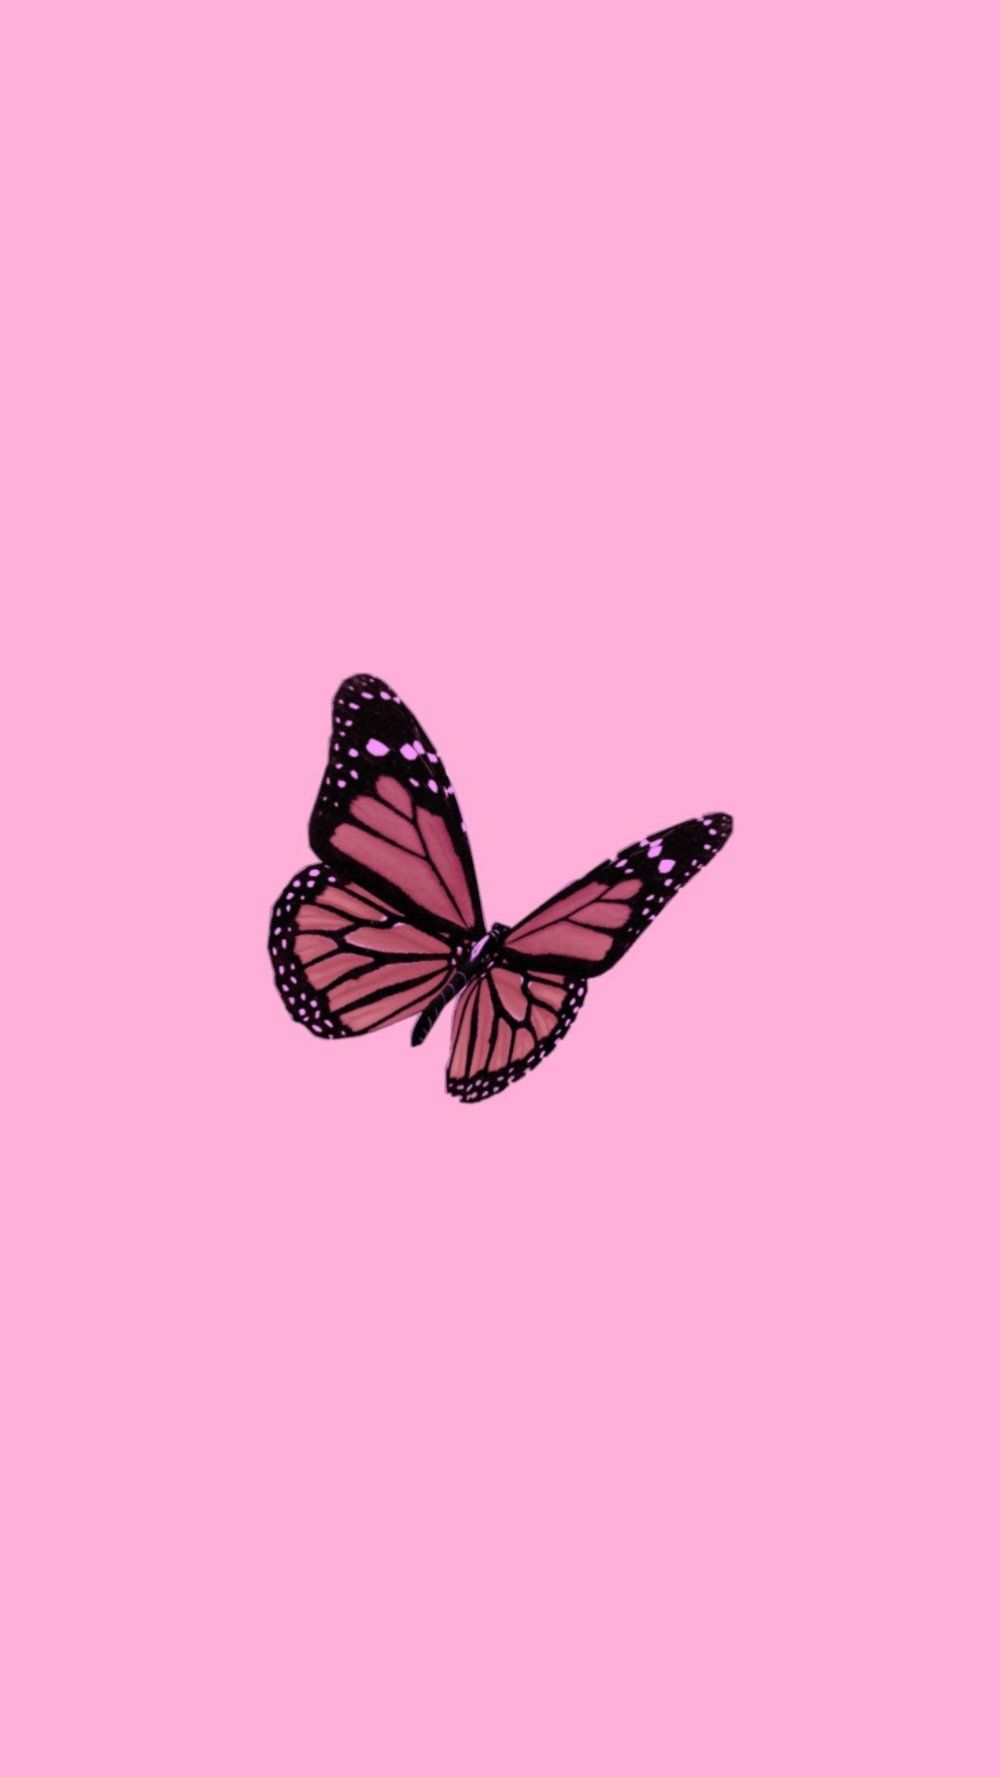 Aesthetic butterfly wallpaper for phone background. - Rose gold